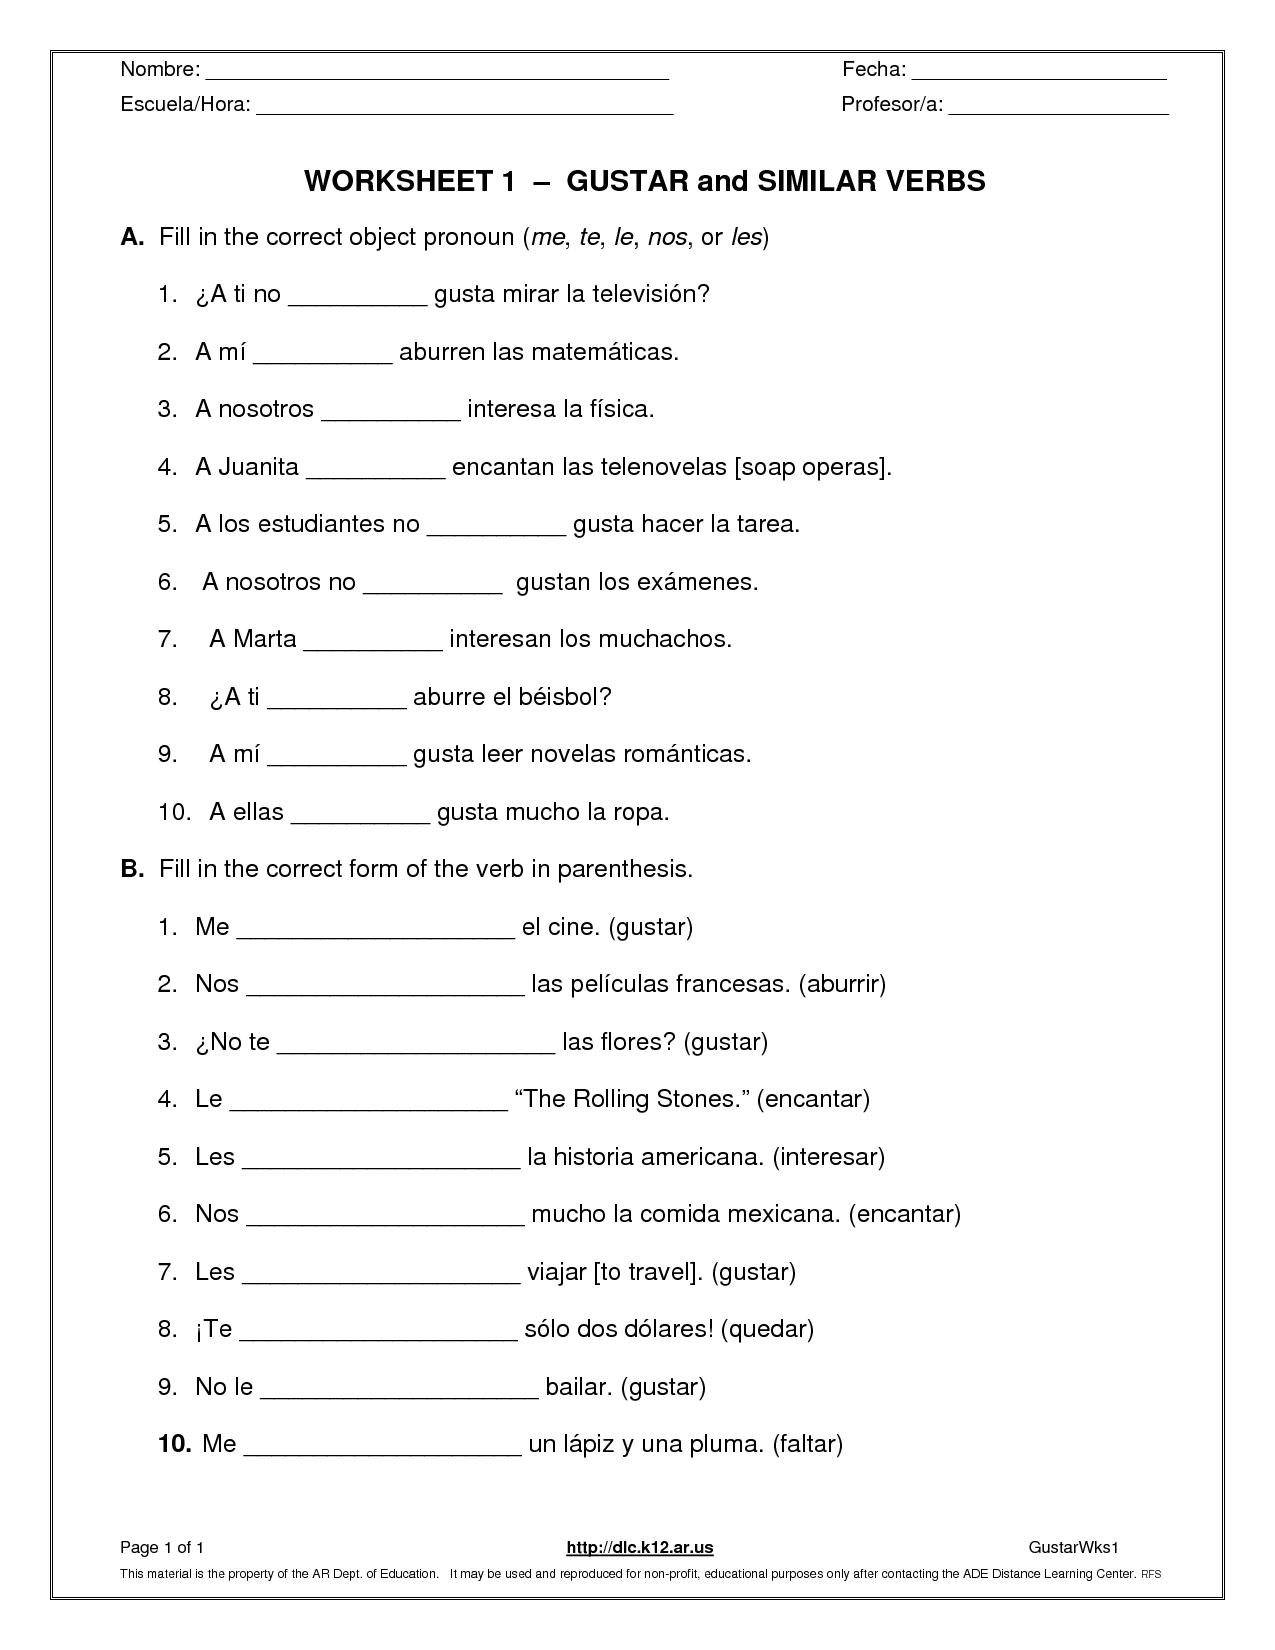 103-best-free-spanish-worksheets-images-on-pinterest-spanish-worksheets-free-printable-and